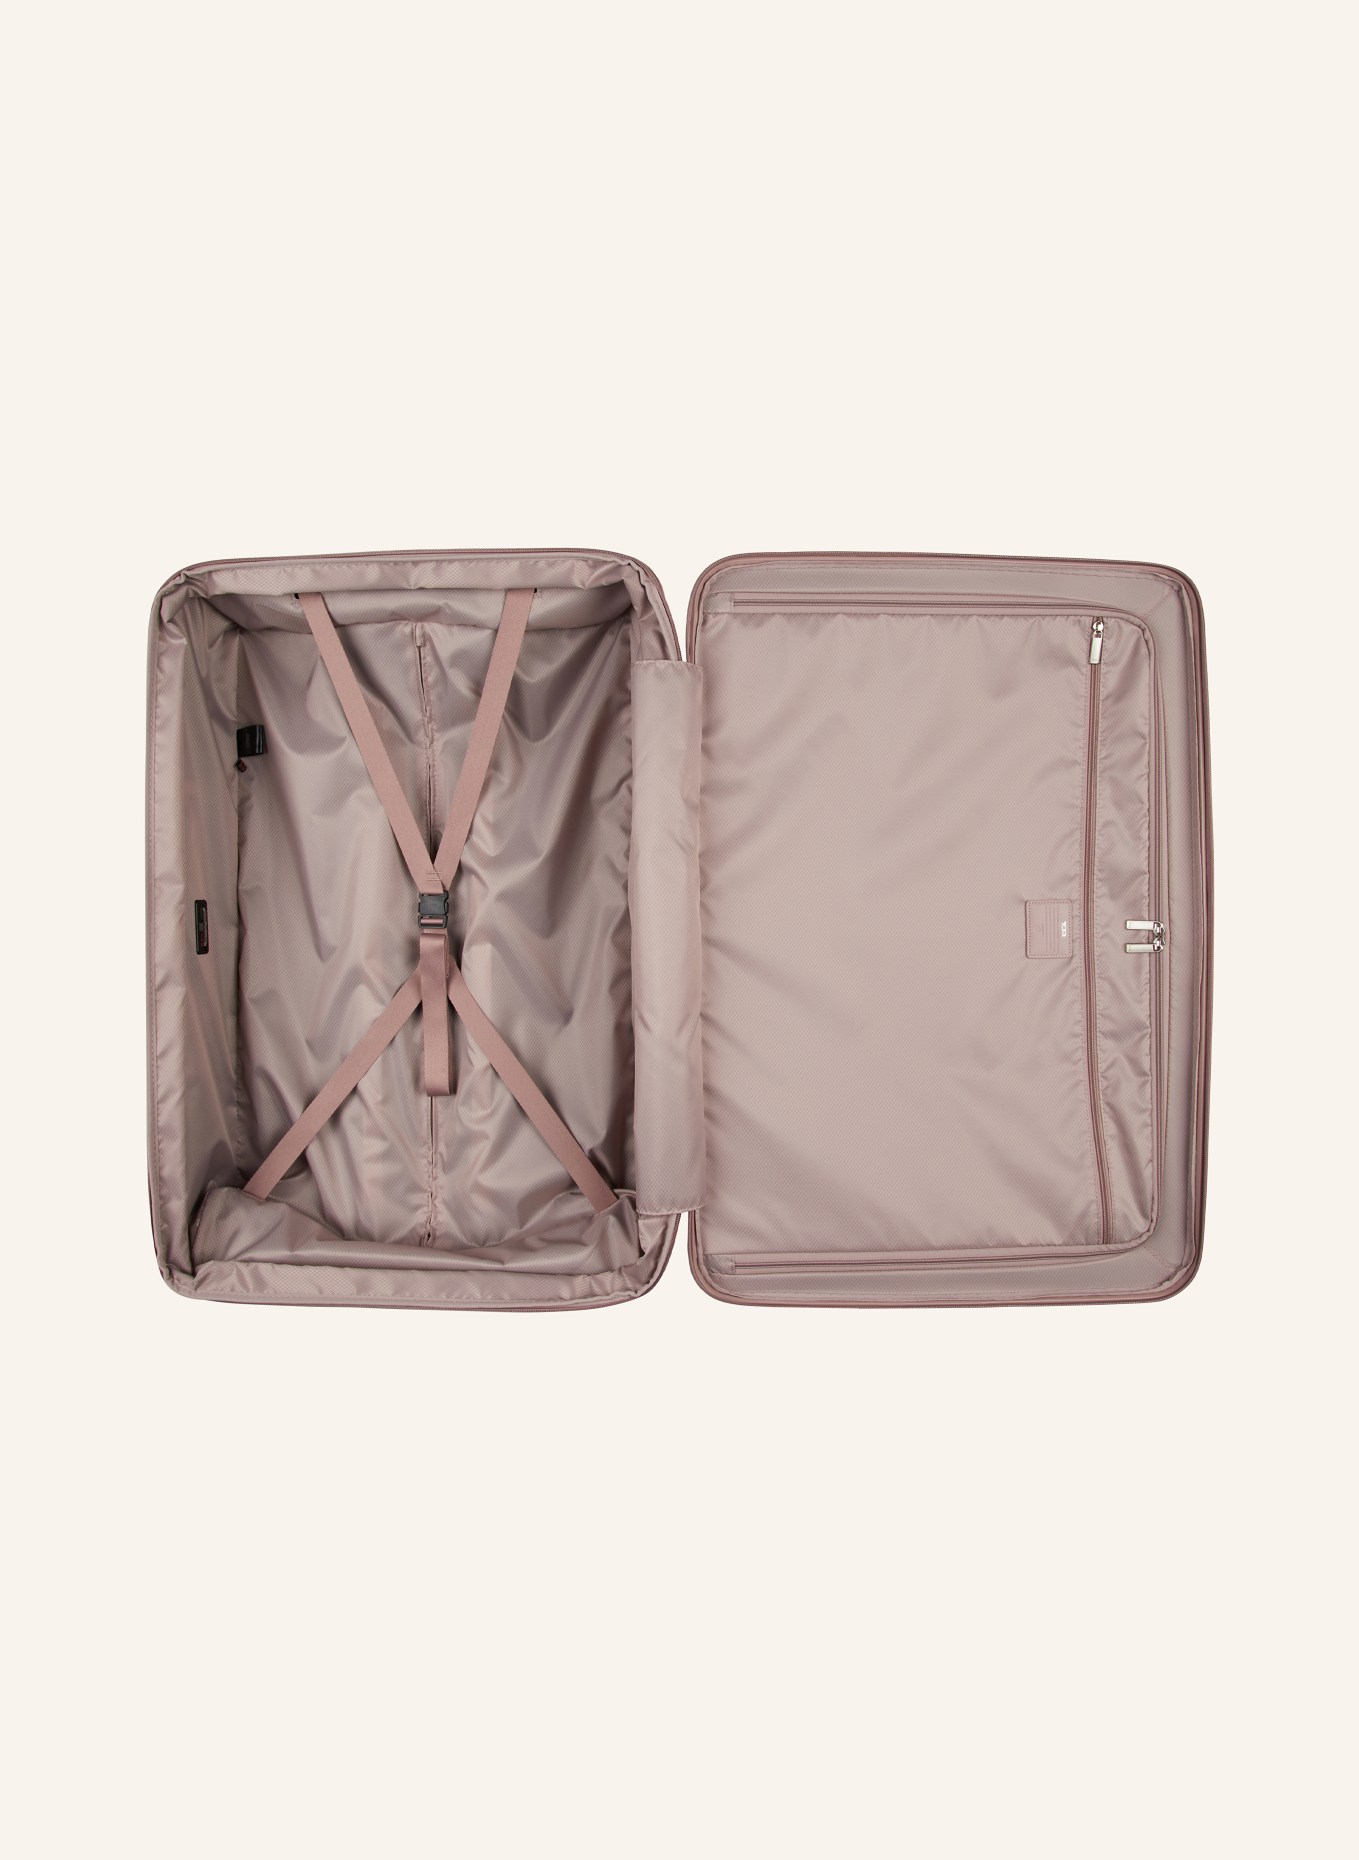 TUMI 19 DEGREE Trolley EXTENDED TRIP EXPANDABLE 4 WHEELED PACKING CASE, Farbe: ROSÉ (Bild 2)